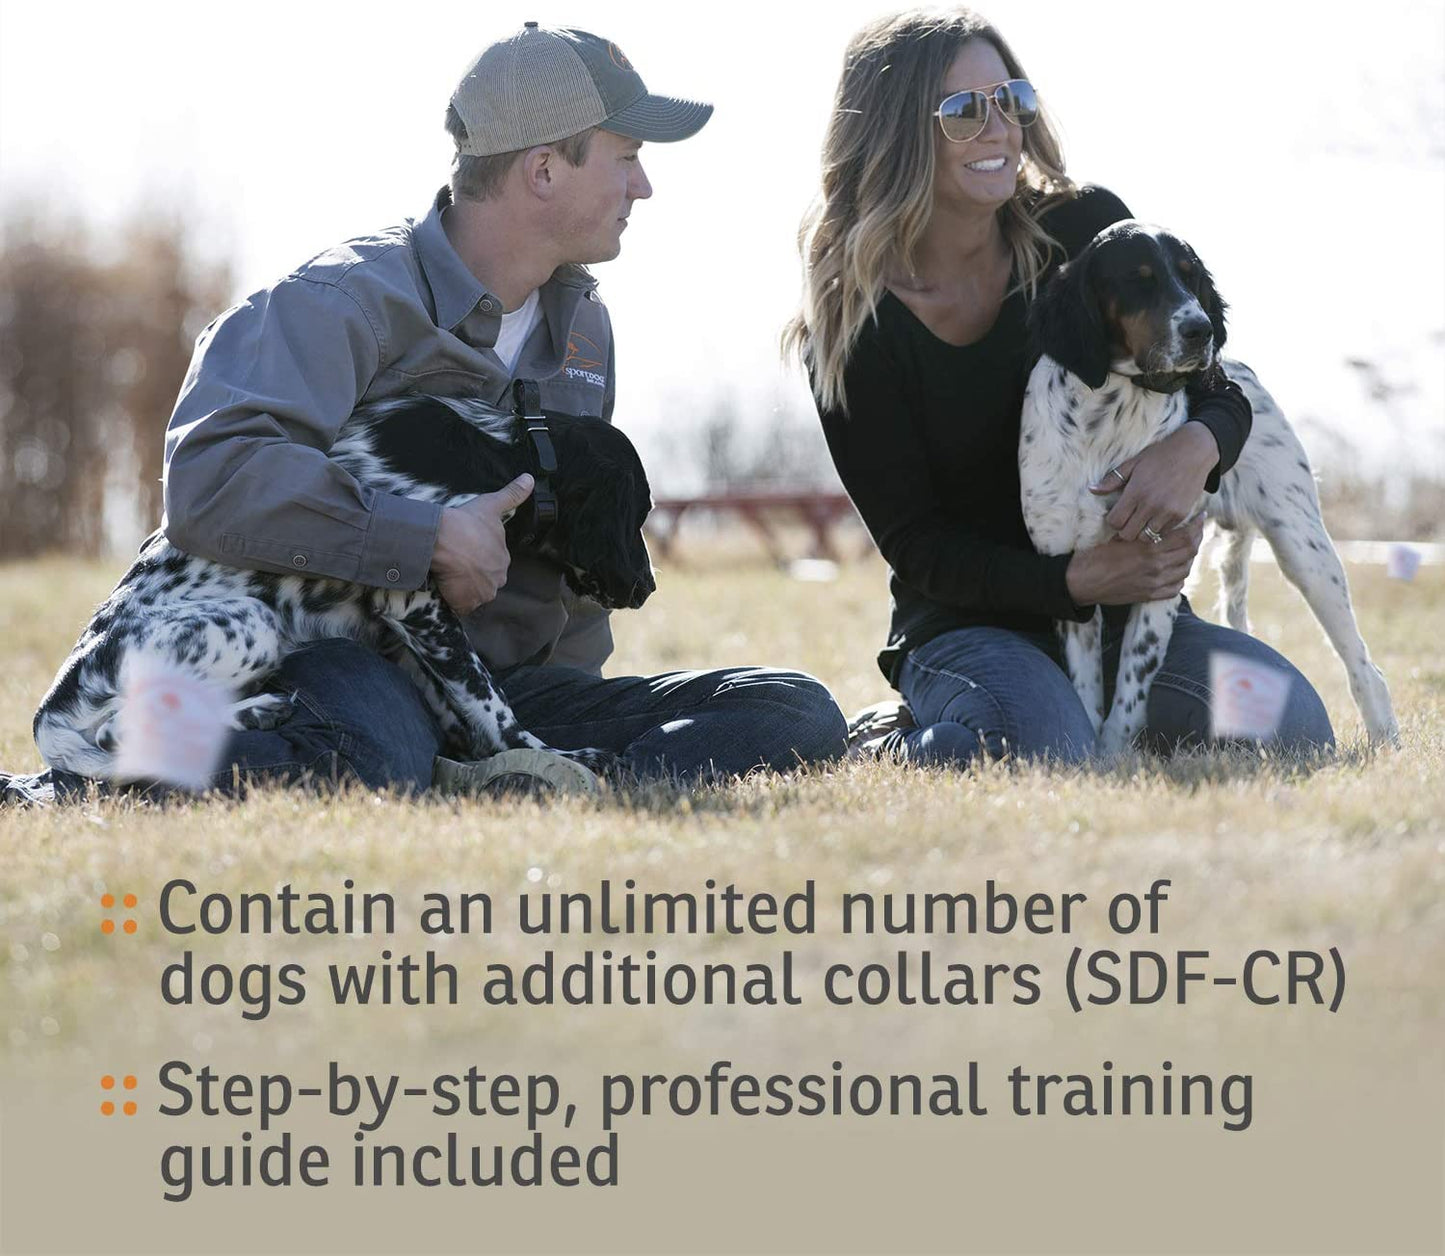 SportDOG Brand Contain + Train System - In-Ground Fence Kit with Remote Trainer - Waterproof, Rechargeable Collar with Tone, Vibrate, and Shock - Expandable to Multiple Dogs - SDF-CT